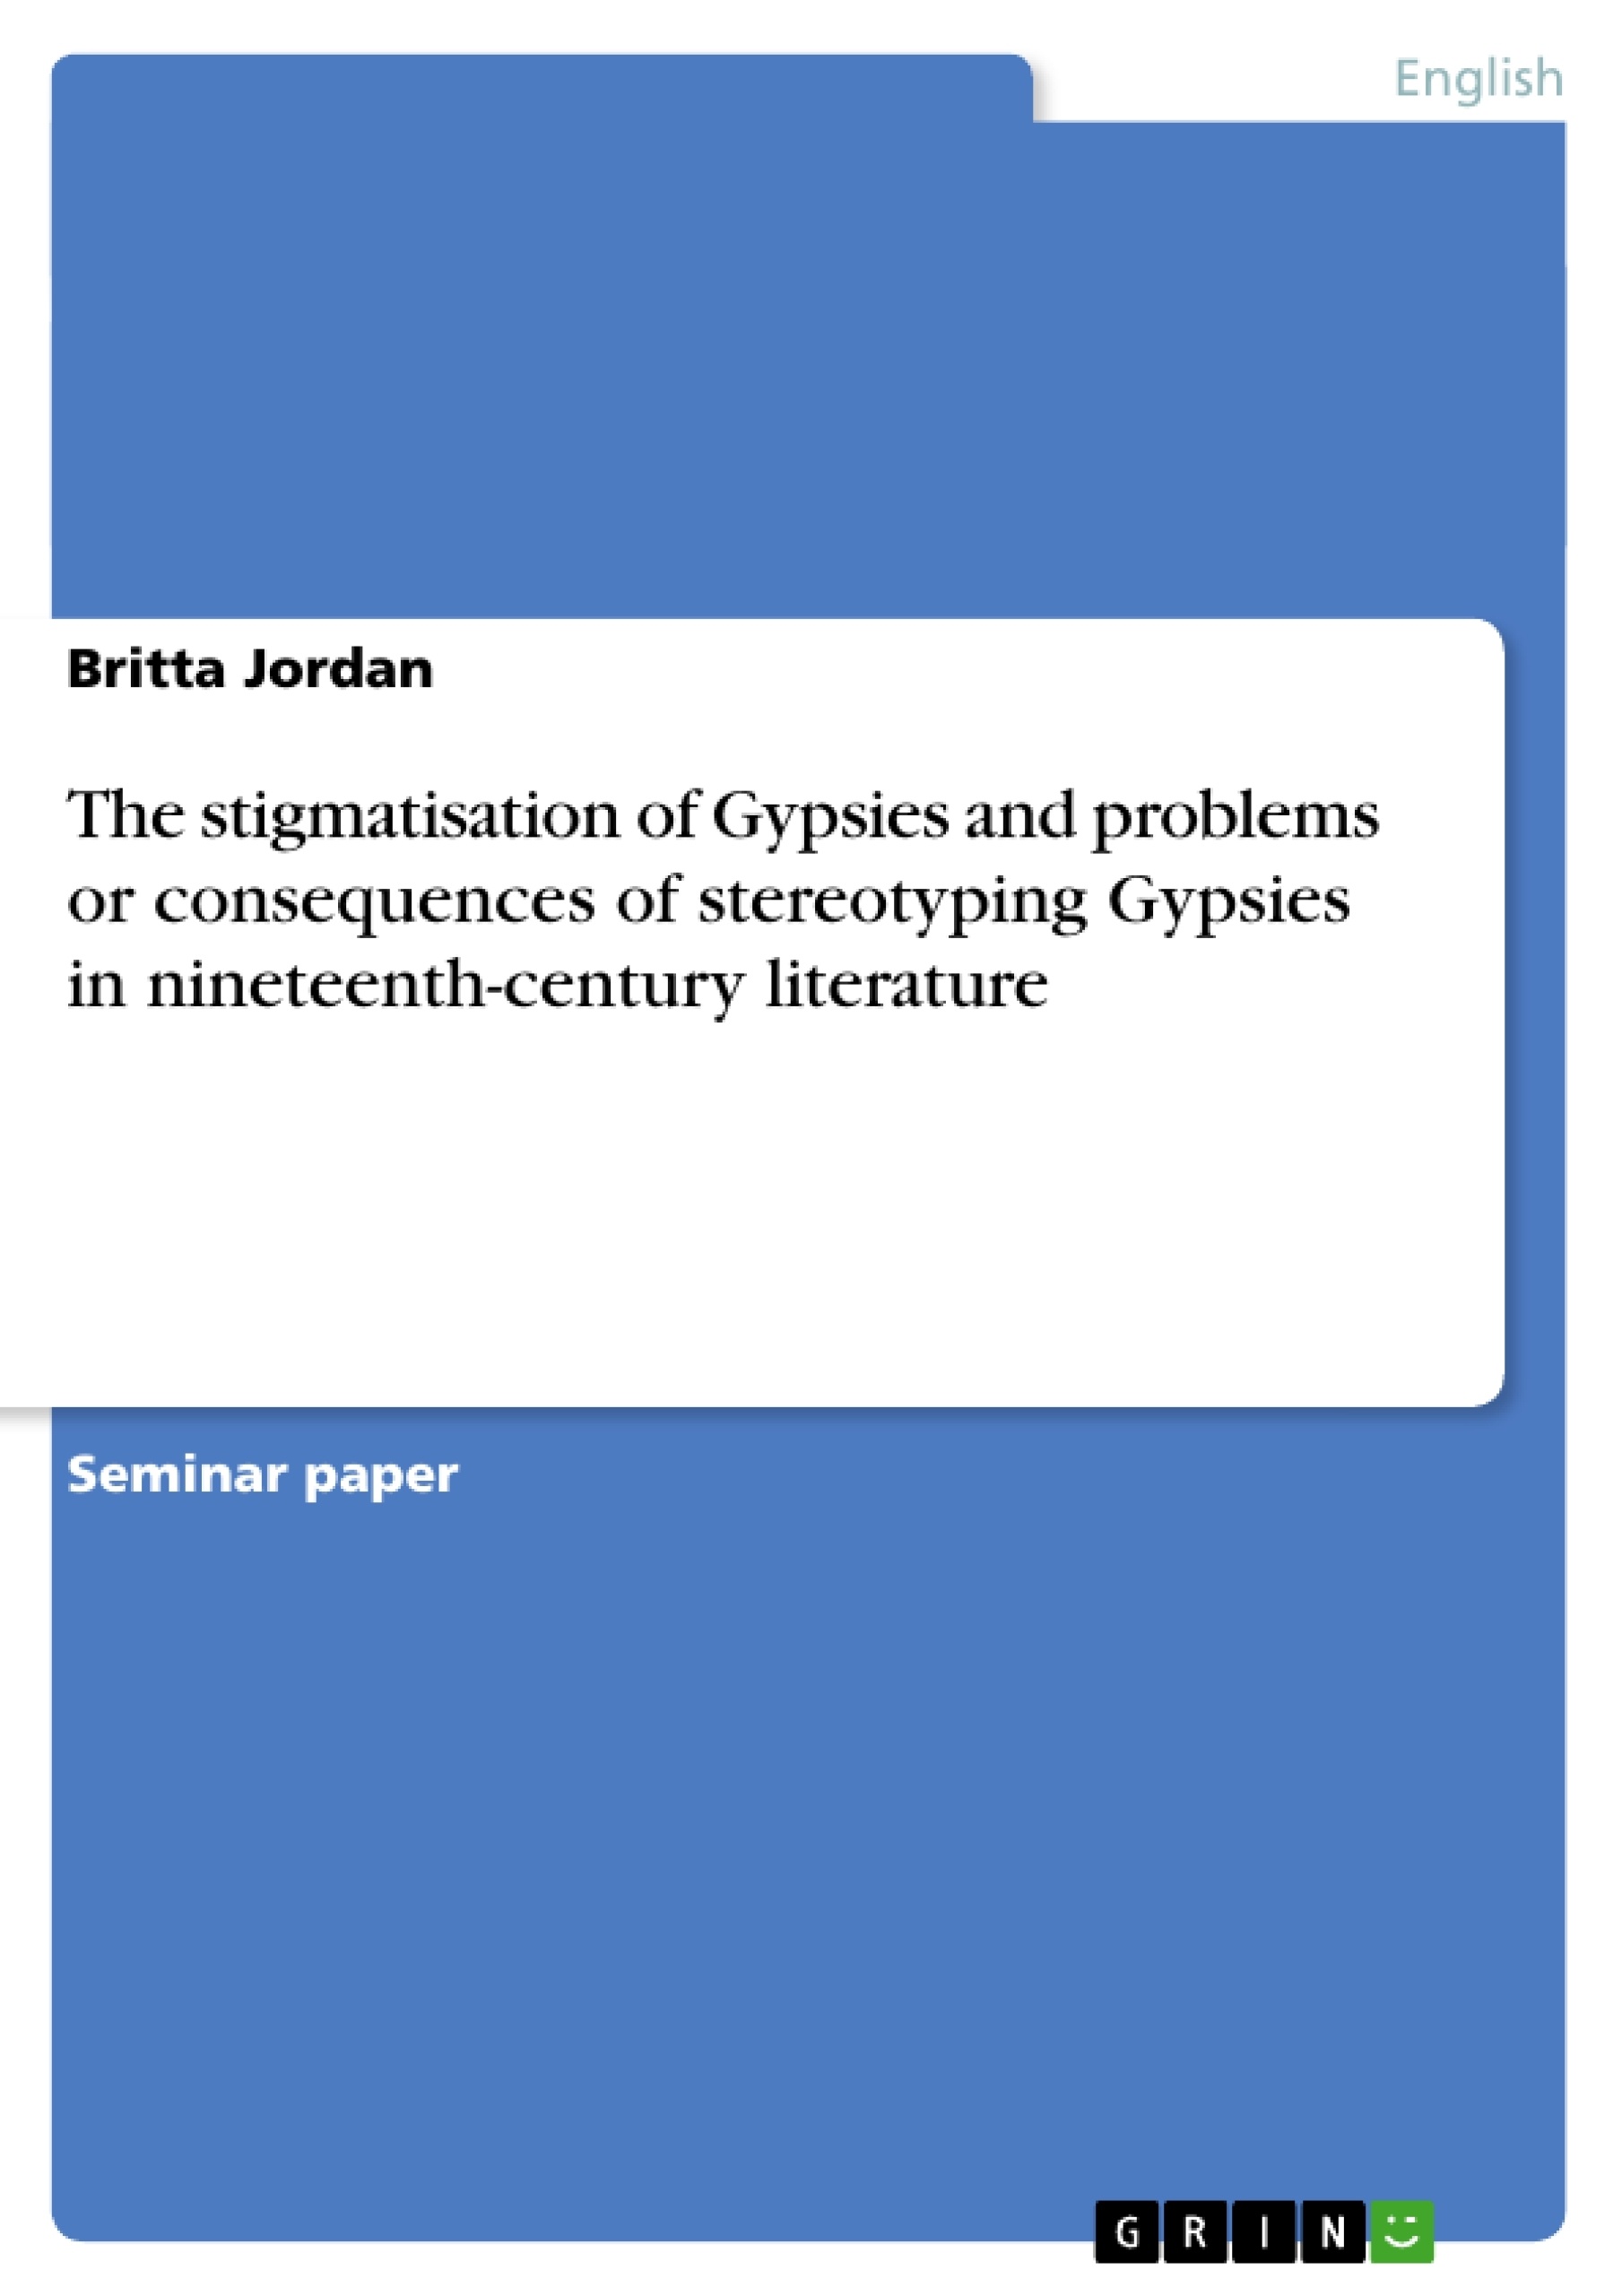 Título: The stigmatisation of Gypsies and problems or consequences of stereotyping Gypsies in nineteenth-century literature